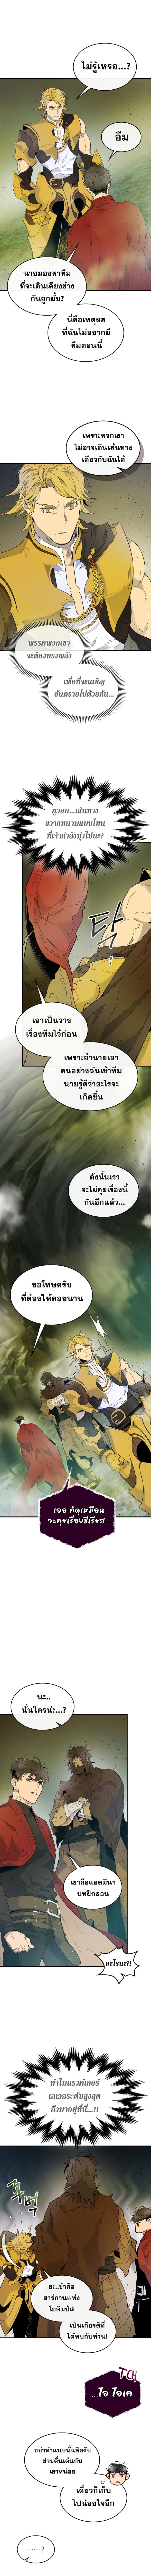 Leveling With The Gods 22 (9)